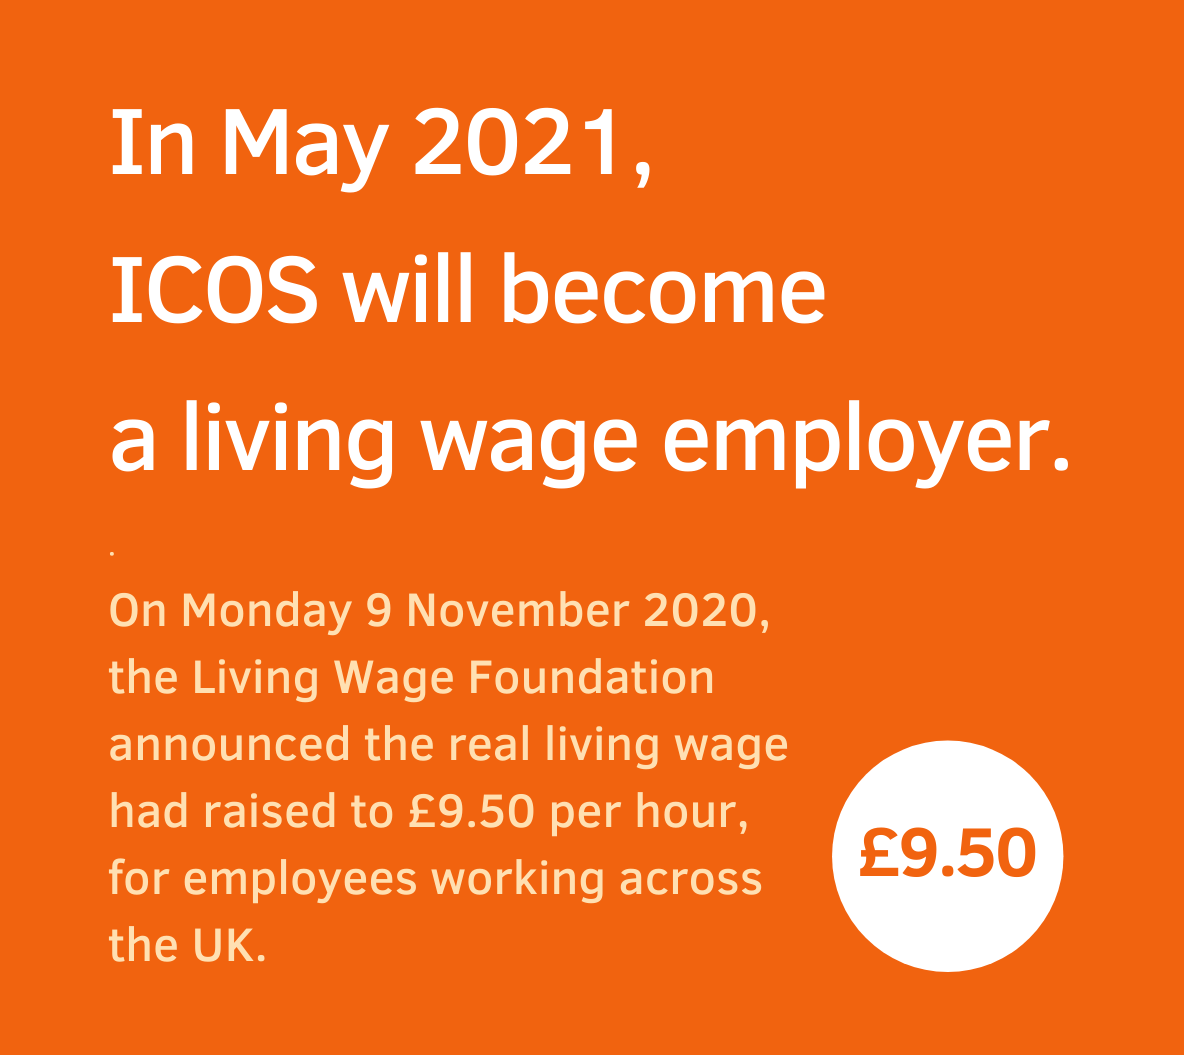 ICOS will a Living wage employer in May 2021 International